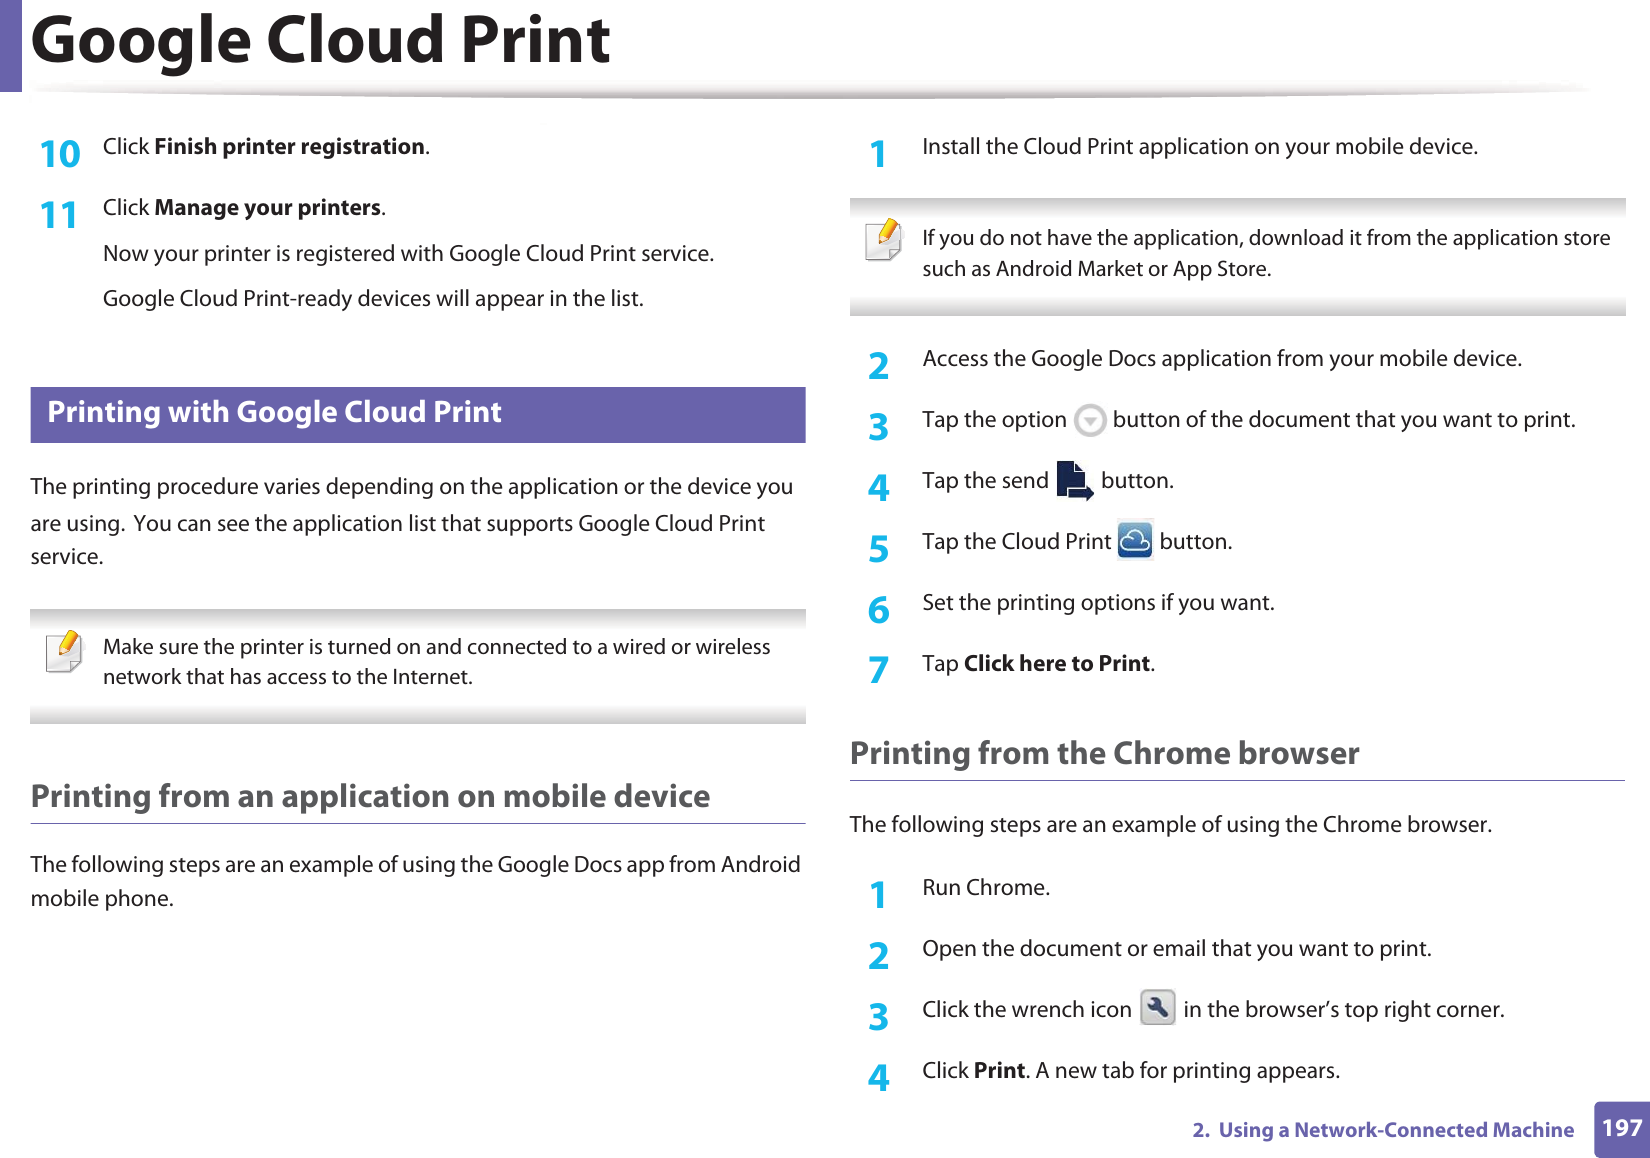 Google Cloud Print1972.  Using a Network-Connected Machine10  Click Finish printer registration.11  Click Manage your printers.Now your printer is registered with Google Cloud Print service.Google Cloud Print-ready devices will appear in the list.28 Printing with Google Cloud PrintThe printing procedure varies depending on the application or the device you are using.GYou can see the application list that supports Google Cloud Print service. Make sure the printer is turned on and connected to a wired or wireless network that has access to the Internet.  Printing from an application on mobile deviceThe following steps are an example of using the Google Docs app from Android mobile phone.1Install the Cloud Print application on your mobile device.  If you do not have the application, download it from the application storeGsuch as Android Market or App Store.  2  Access the Google Docs application from your mobile device. 3  Tap the option   button of the document that you want to print.4  Tap the send   button.5  Tap the Cloud Print   button.6  Set the printing options if you want.7  Tap Click here to Print.Printing from the Chrome browserThe following steps are an example of using the Chrome browser.1Run Chrome.2  Open the document or email that you want to print.3  Click the wrench icon   in the browser’s top right corner.4  Click Print. A new tab for printing appears.